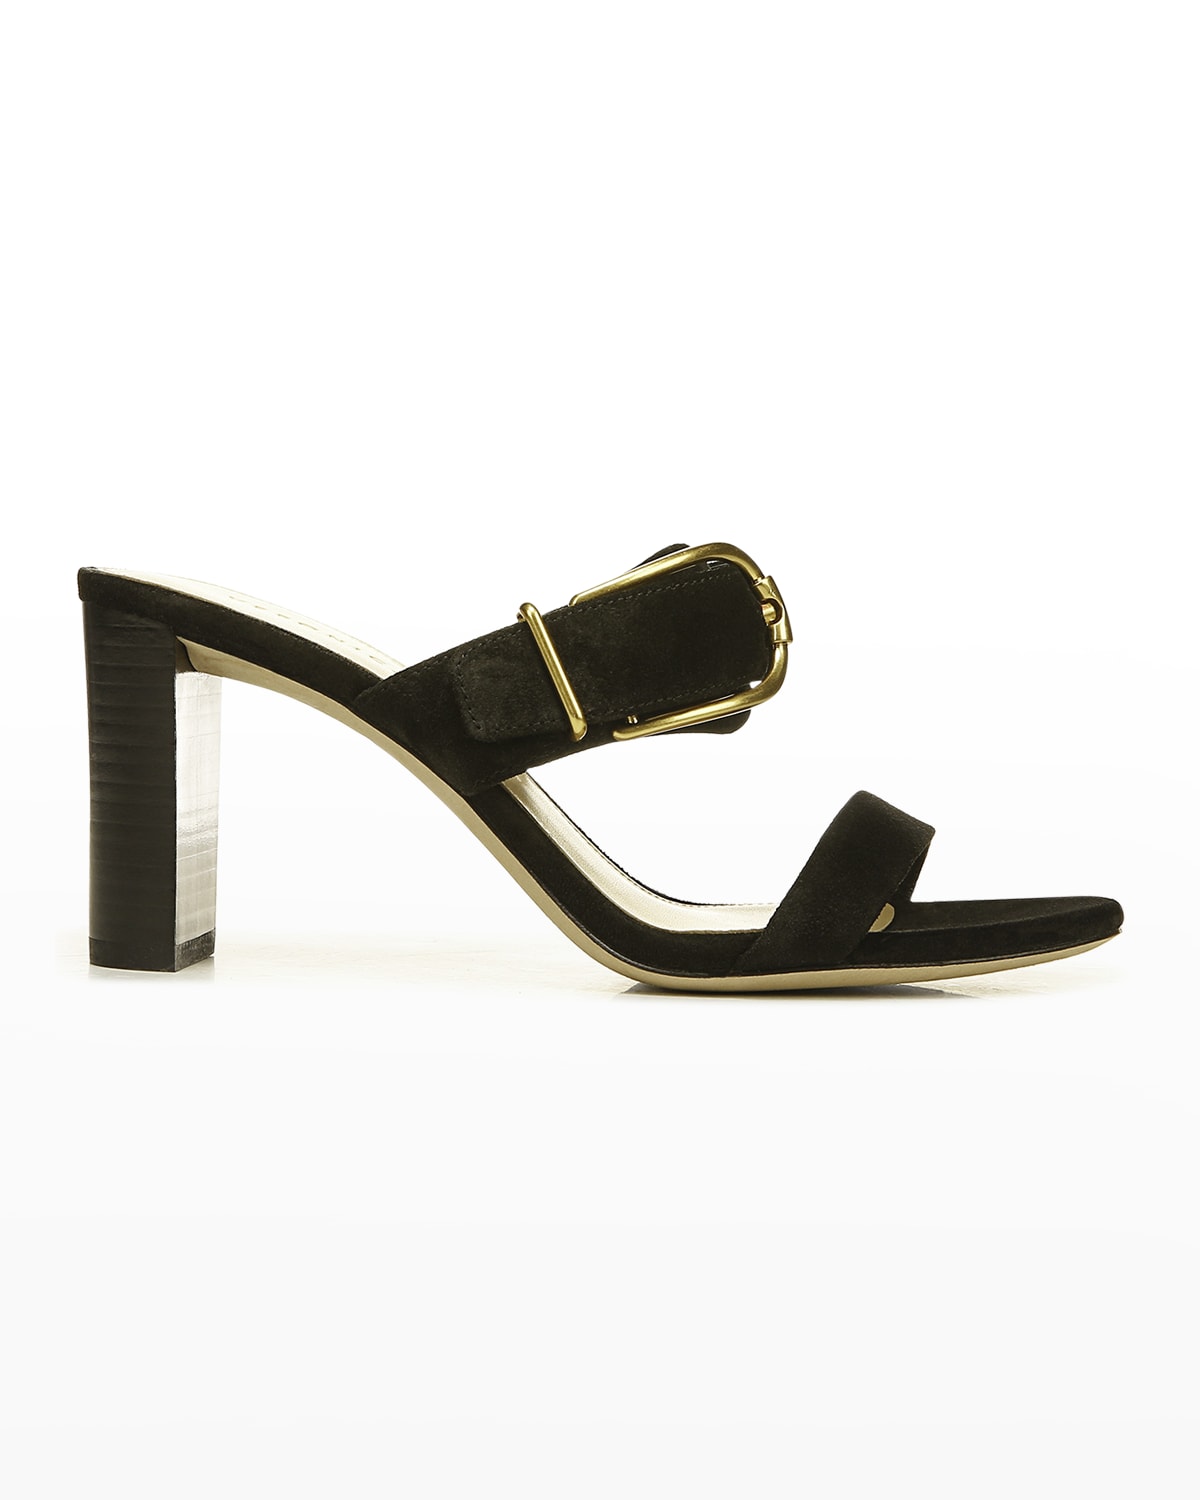 Veronica Beard Ginny Suede Caged Mule Sandals | Neiman Marcus